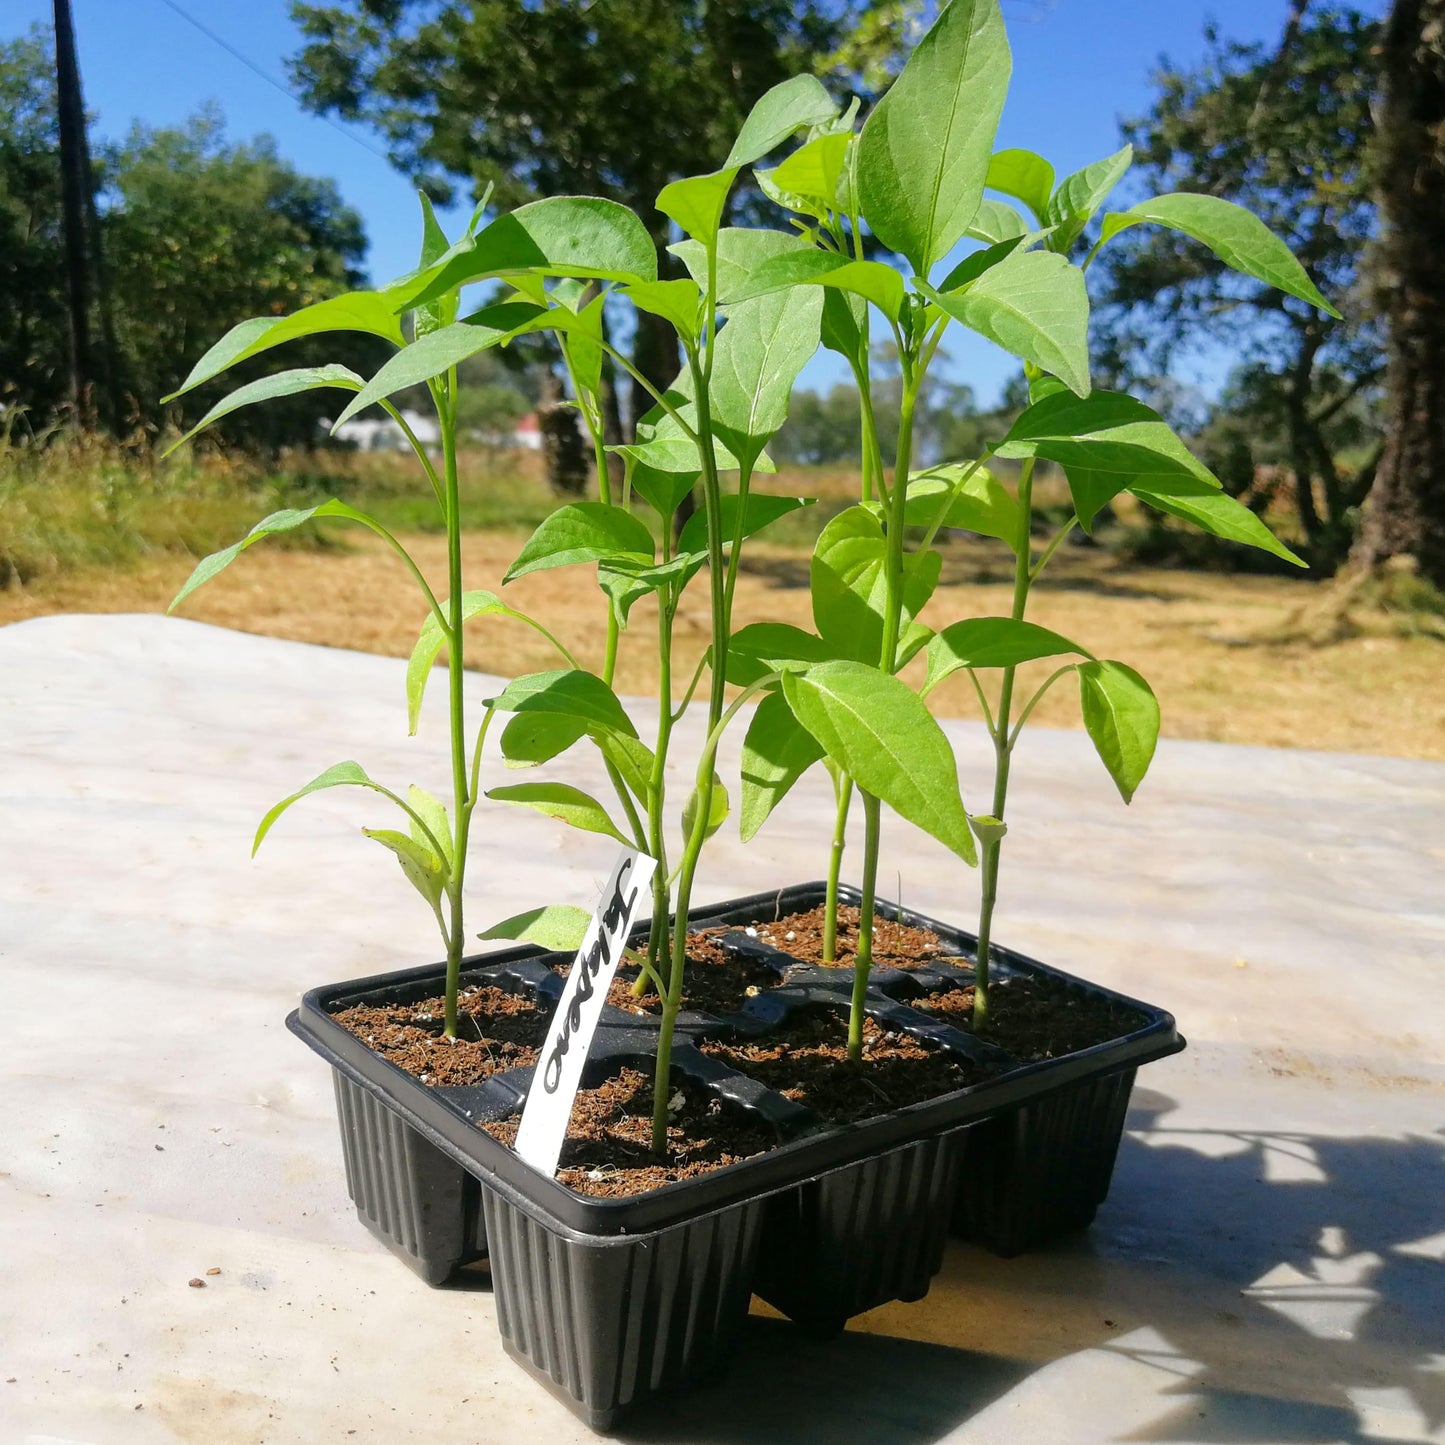 Chilli Peppers 6 pack - Jalapeno - BuyGrow Seedlings